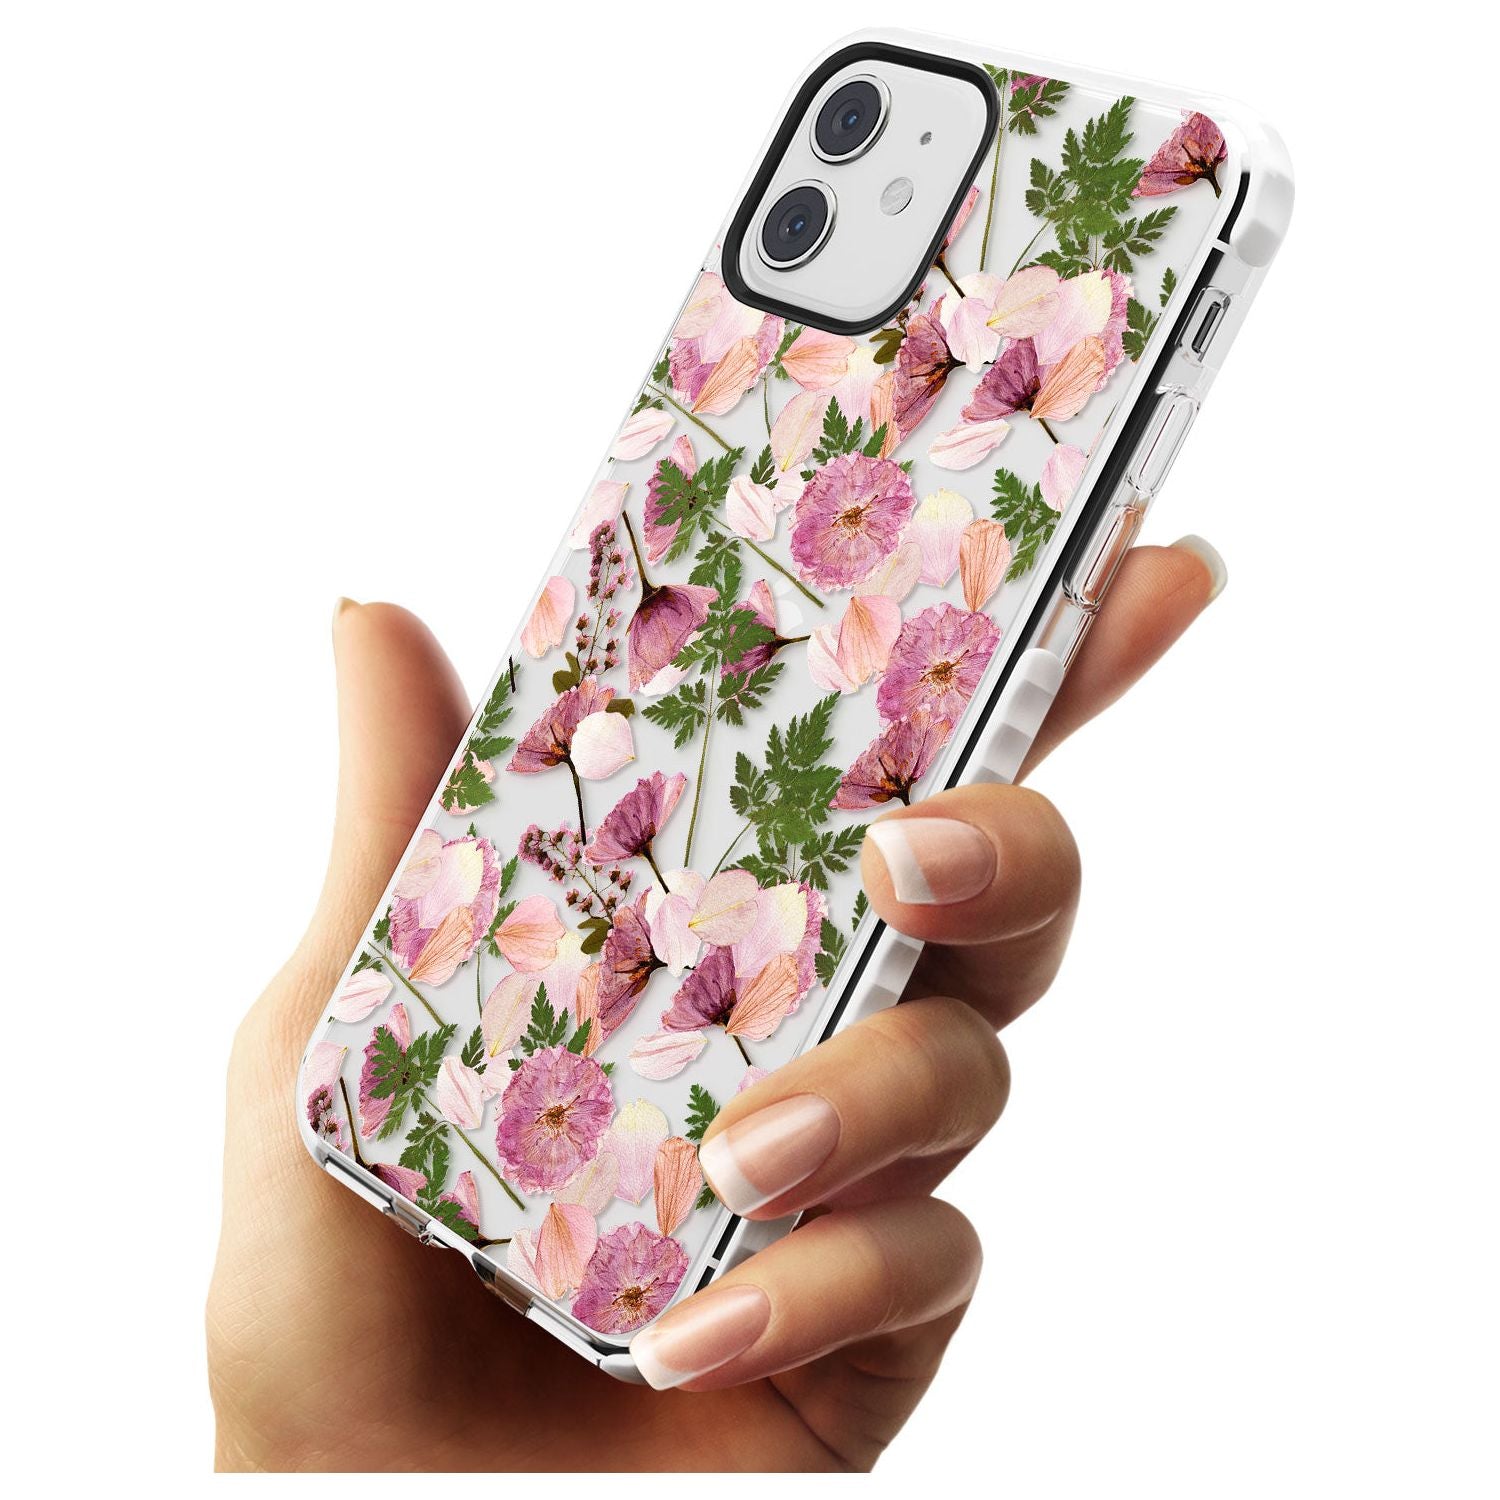 Leafy Floral Pattern Transparent Design Impact Phone Case for iPhone 11